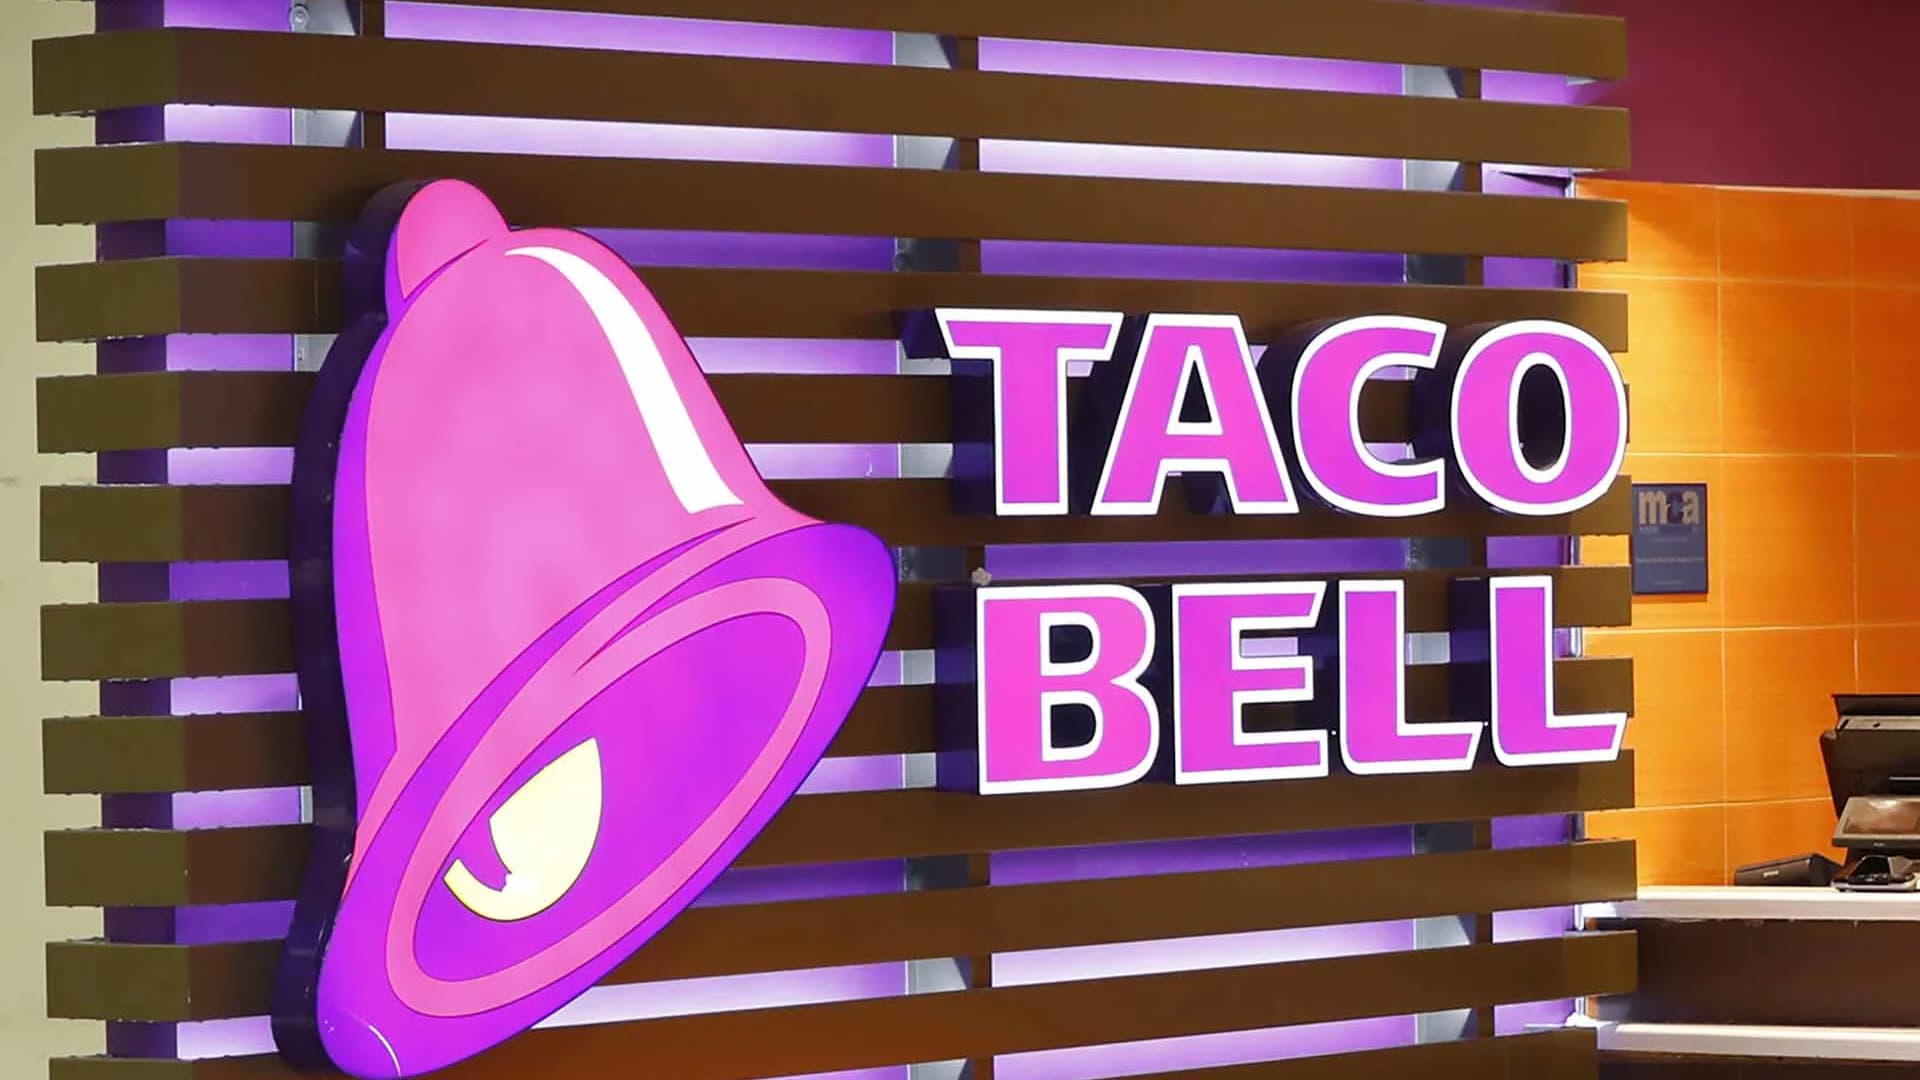 Fan-favorite Mexican Pizza returning to Taco Bell